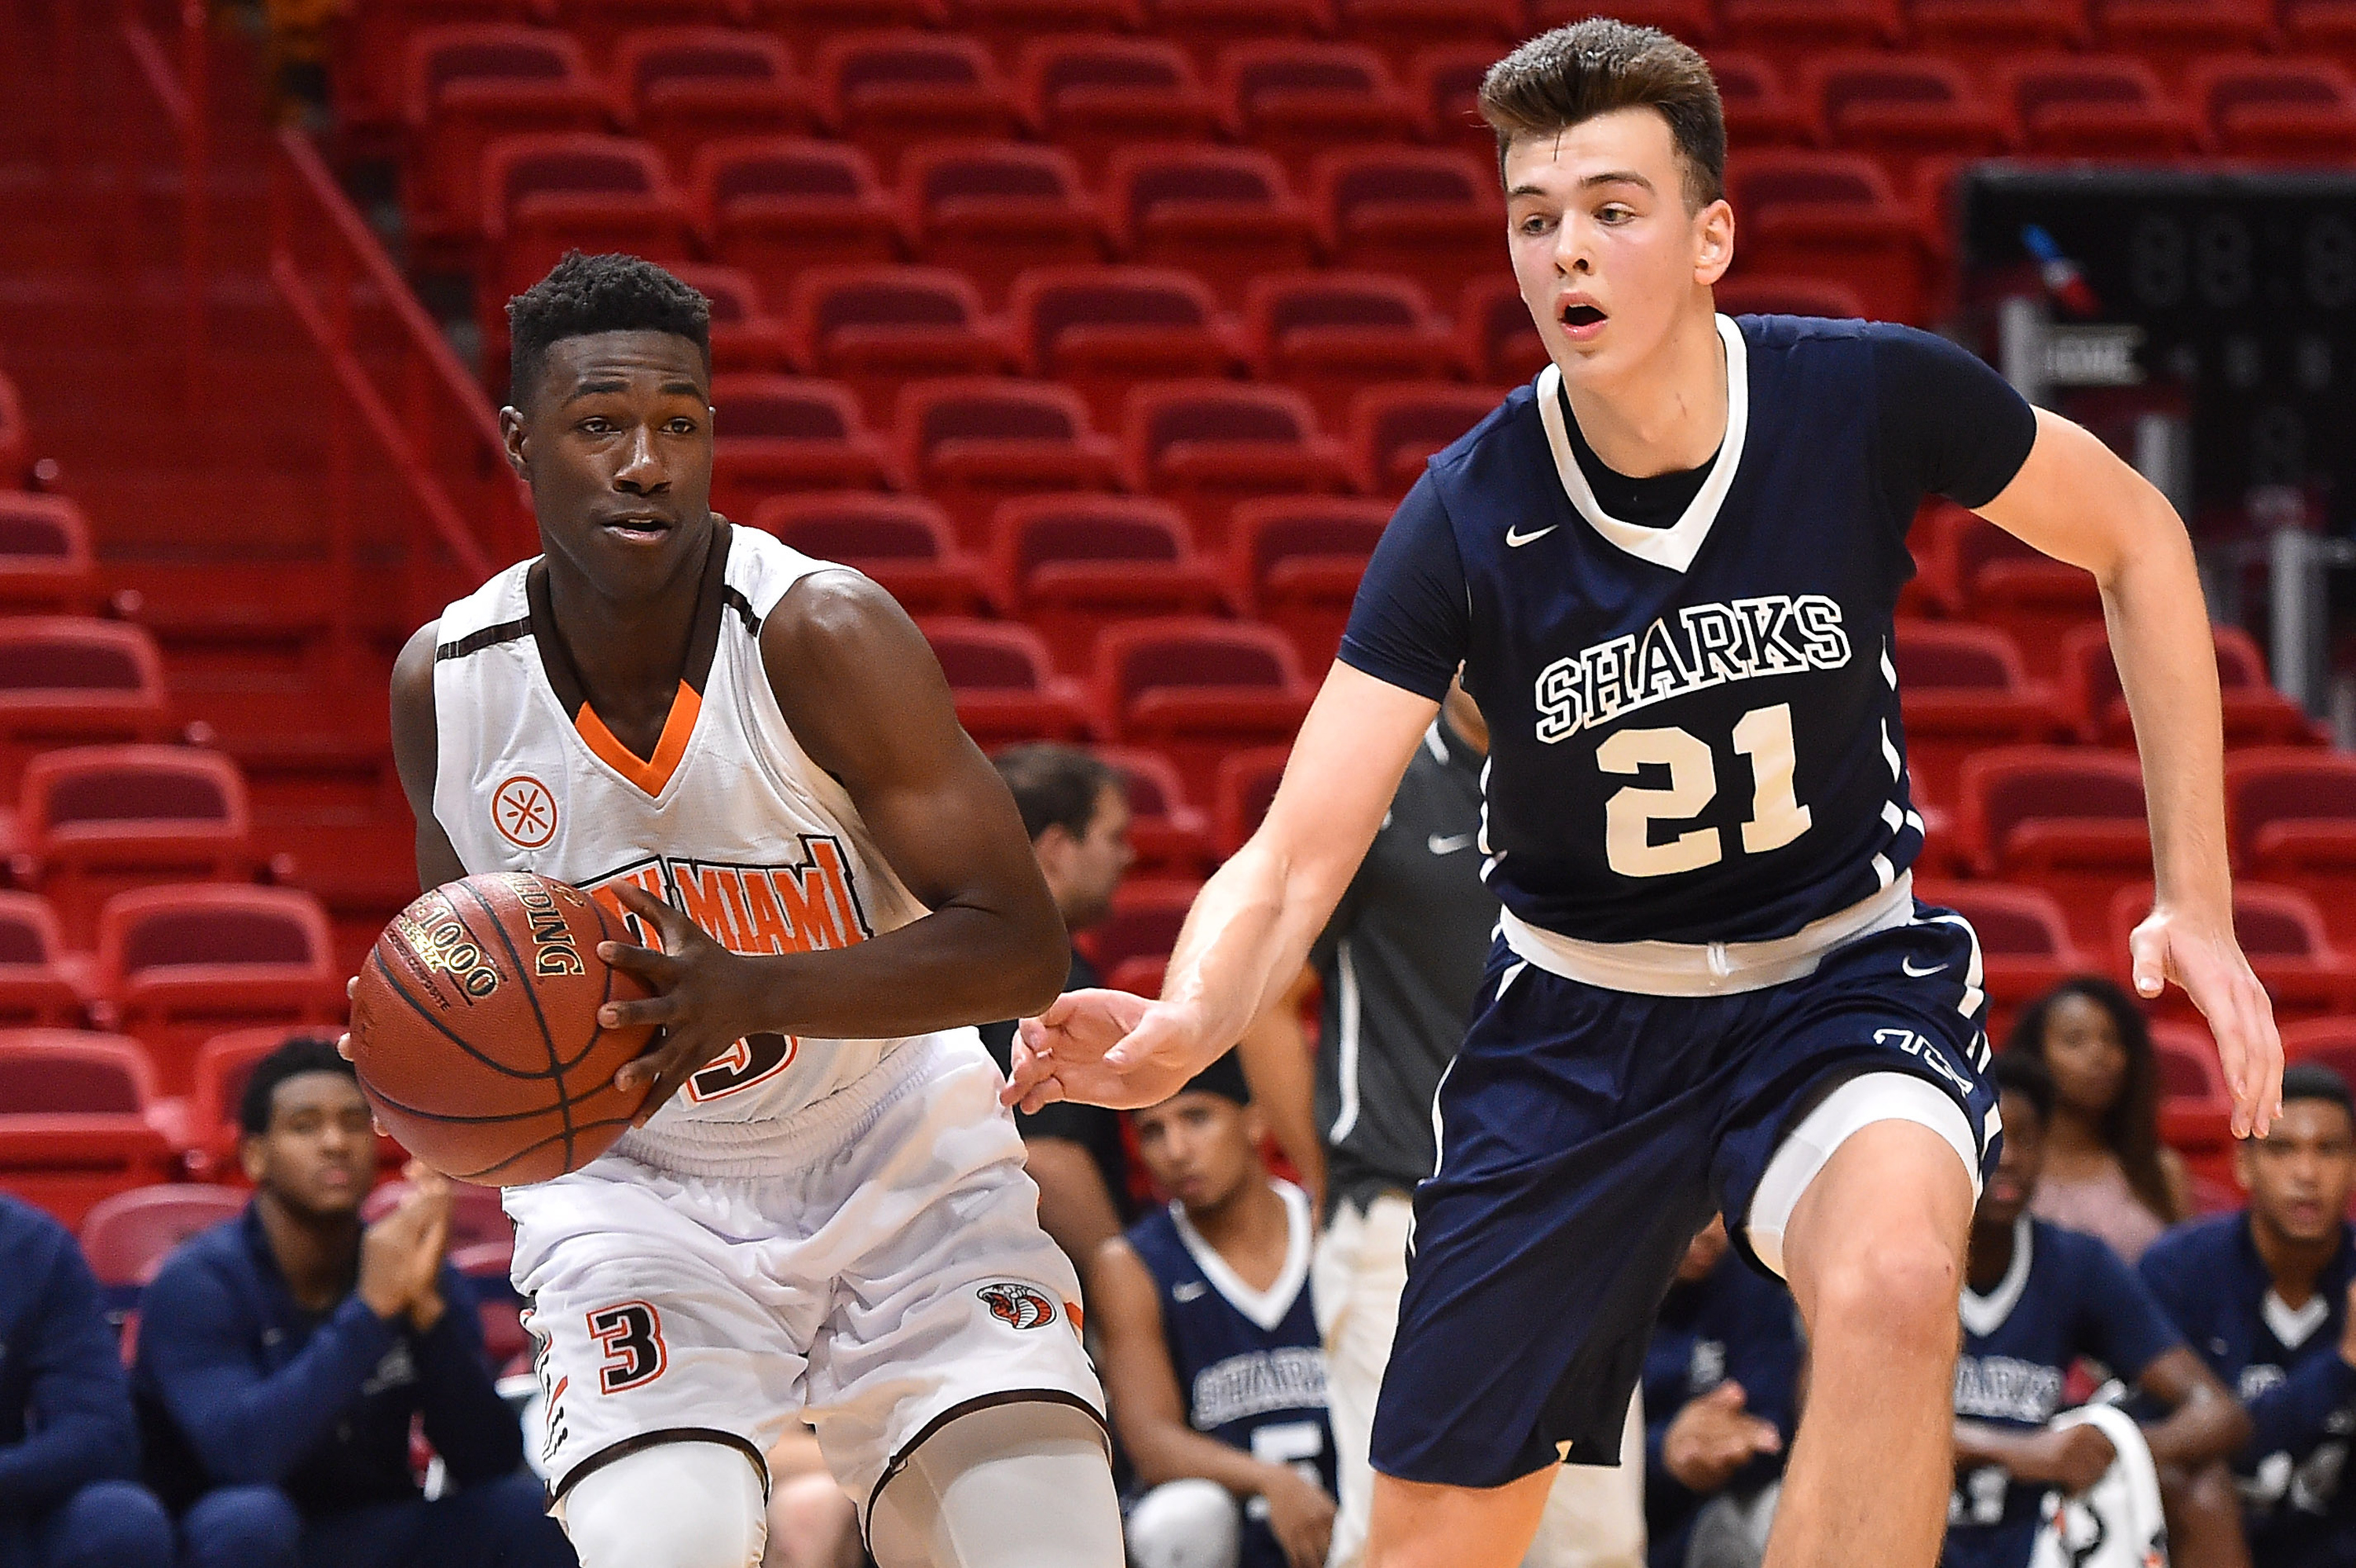 12/8/16 9:09:59 PM -- Miami, FL, U.S.A -- South Miami gaurd Kaevon Tyler (3) passes the ball around University School center Balsa Koprivica (21) during the first half of the HoopHall Miami Invitational. -- Photo by Jasen Vinlove-USA TODAY Sports Images, Gannett ORG XMIT: US 135835 hoophall 12/8/2016 [Via MerlinFTP Drop]